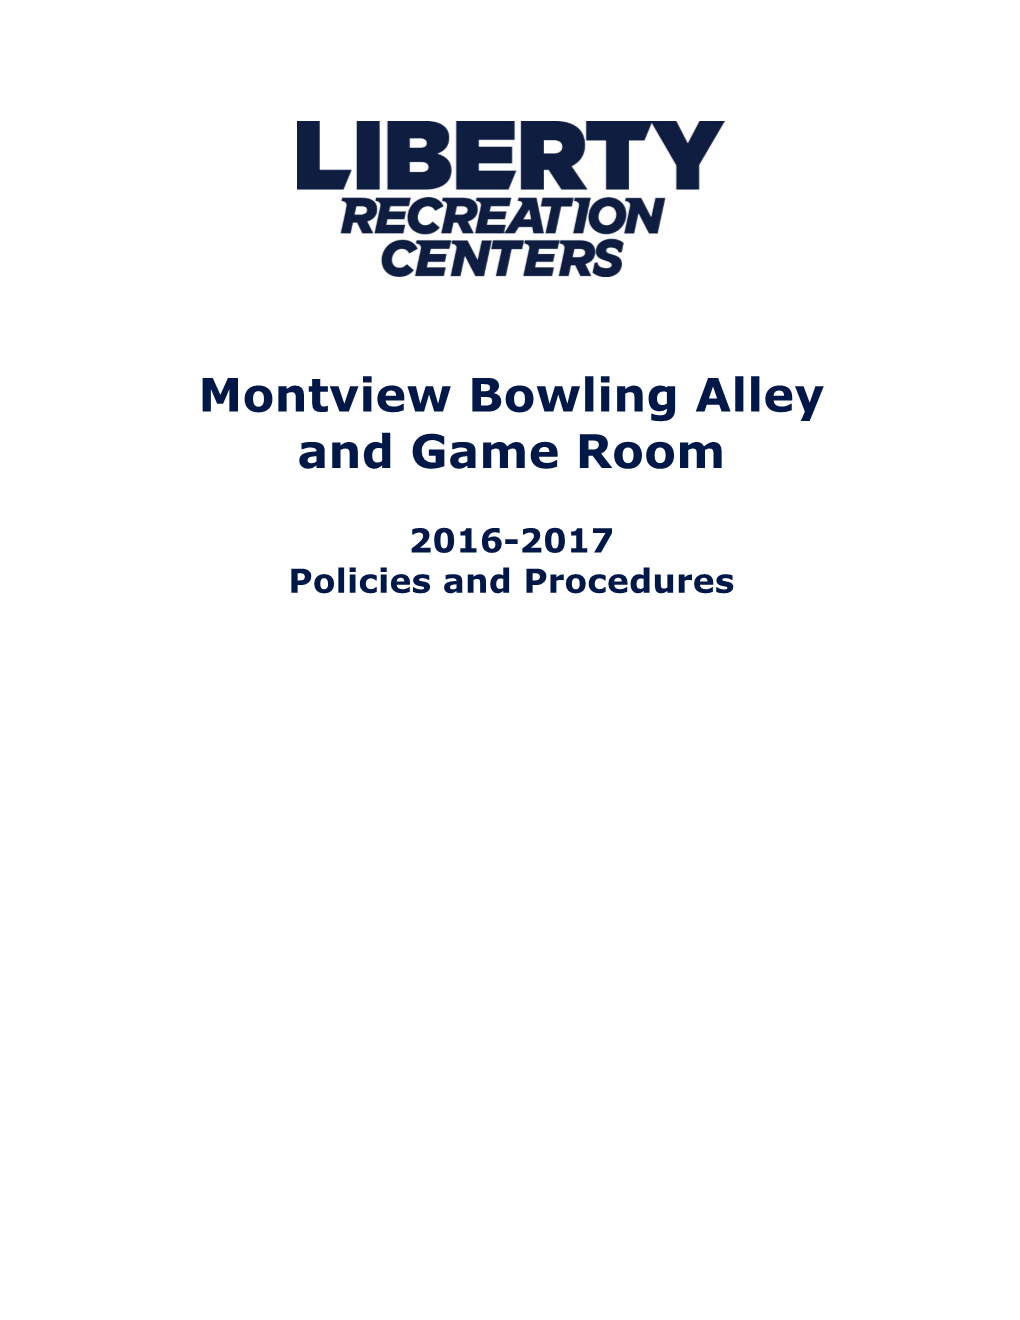 Montview Bowling Alley and Game Room